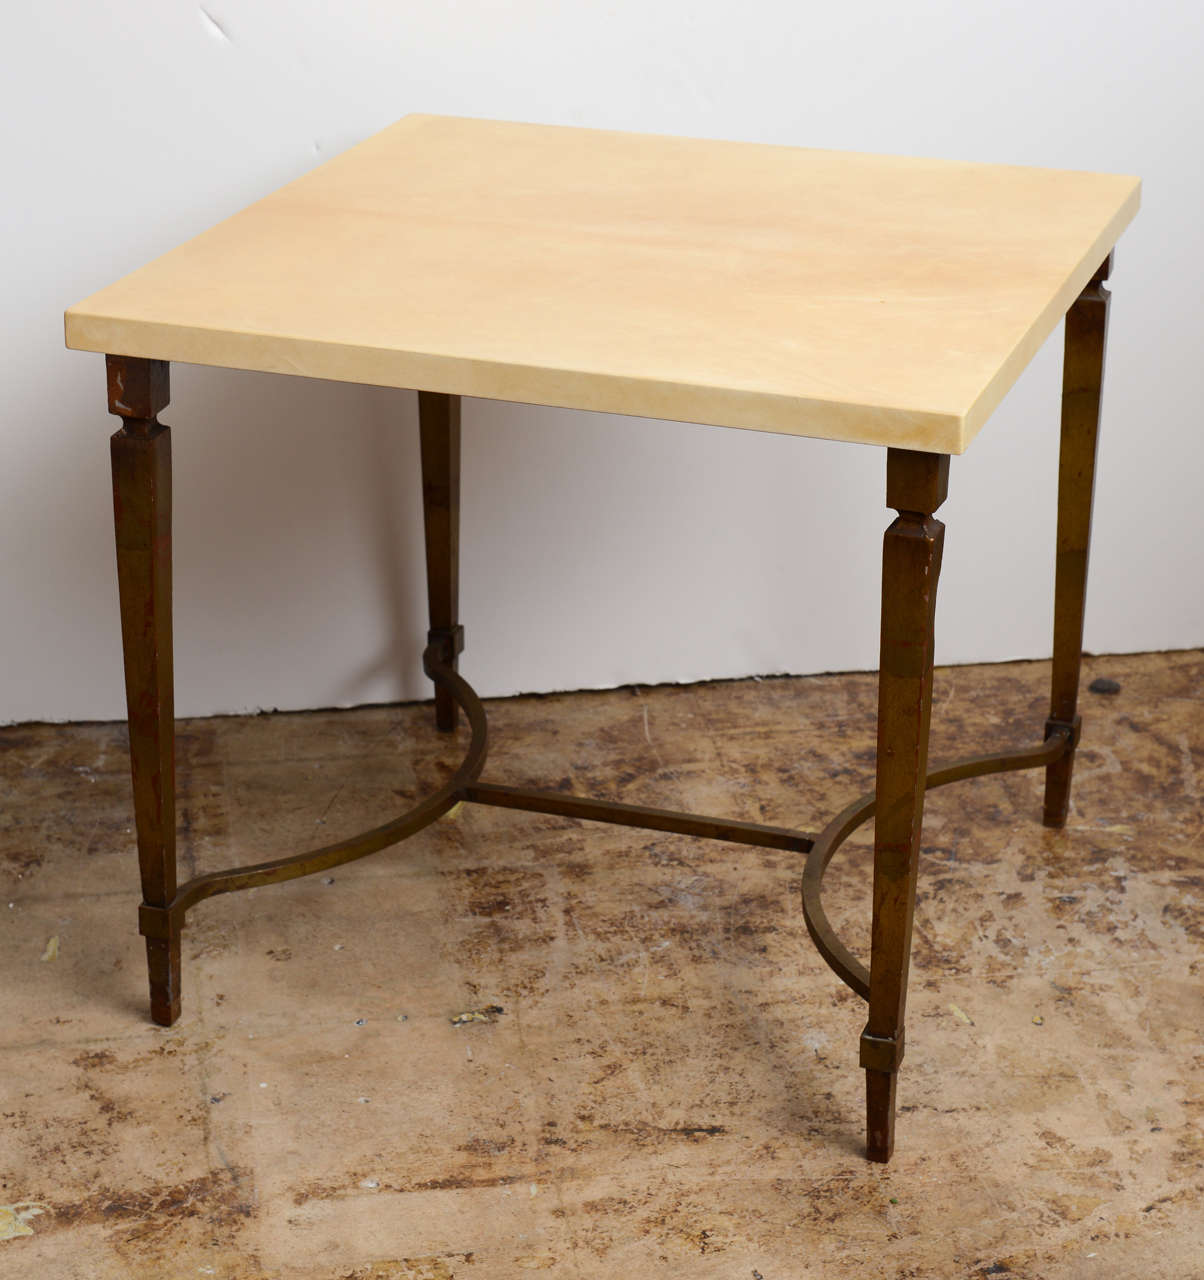 Beautifull classic Goatskin Table by Italian Designer Aldo Tura . This table dates back to the 1960,s and it is in excellent condition. The metal  legs have a stunning Gold leaf patina . Great timeless vintage  piece .